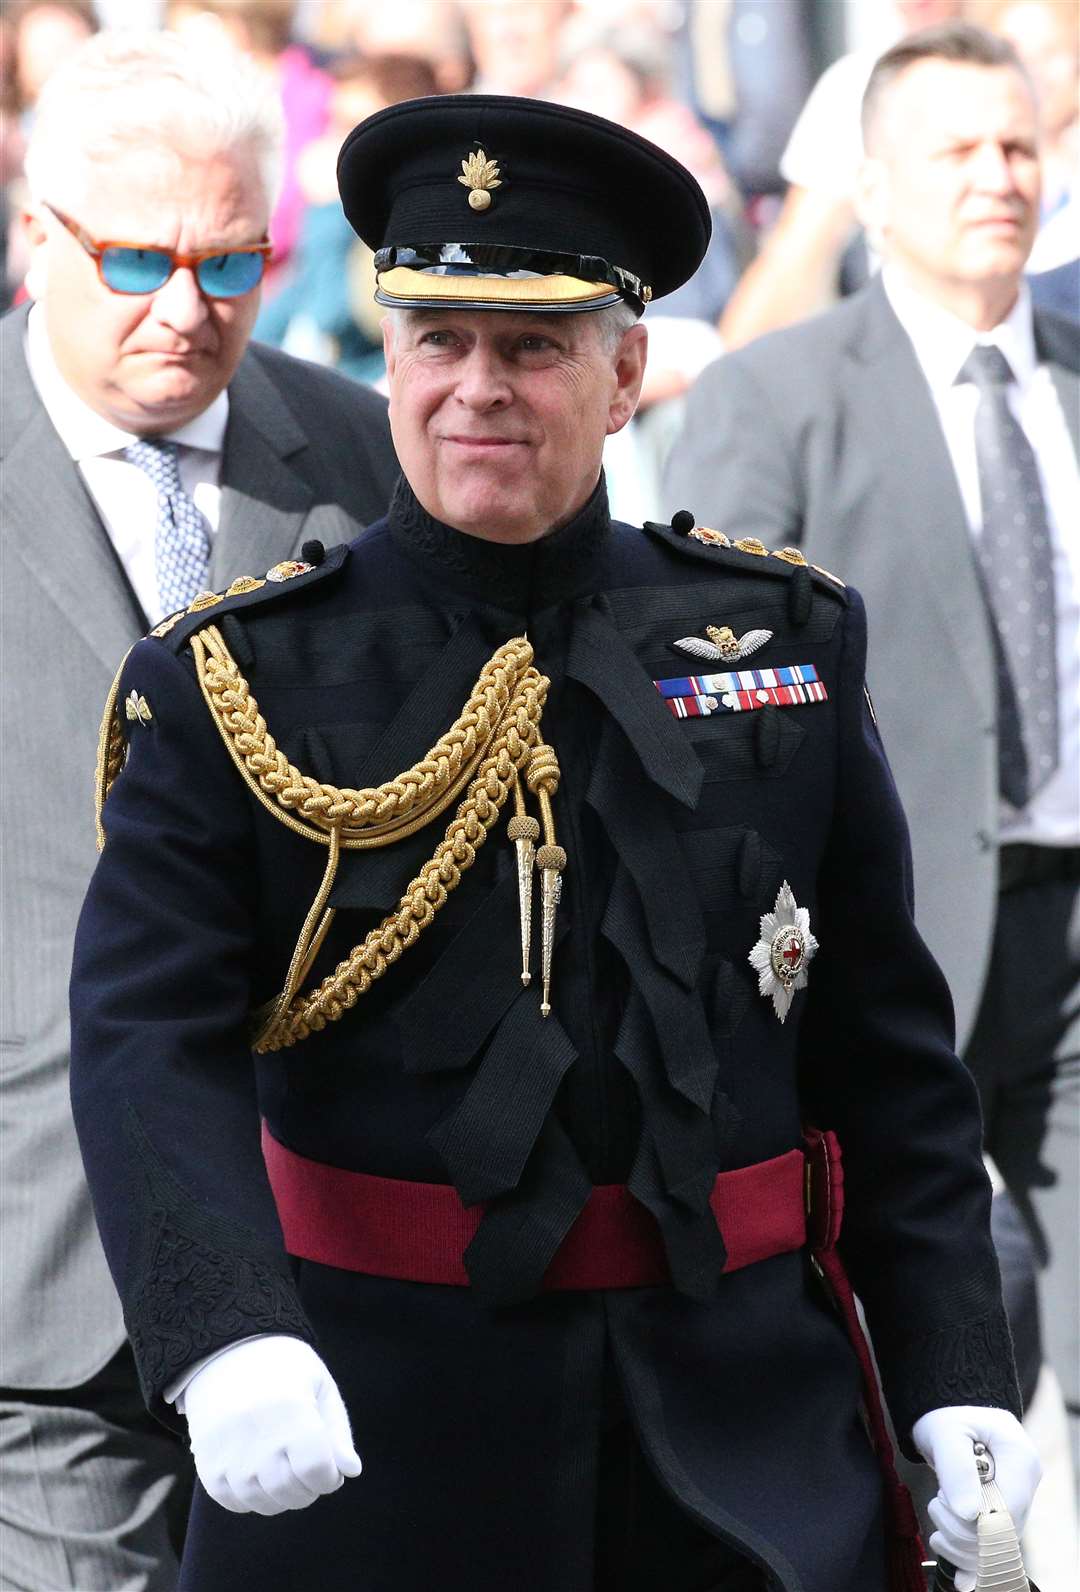 The Duke of York has been stripped of his military affiliations and royal patronages (Jonathan Brady/PA)